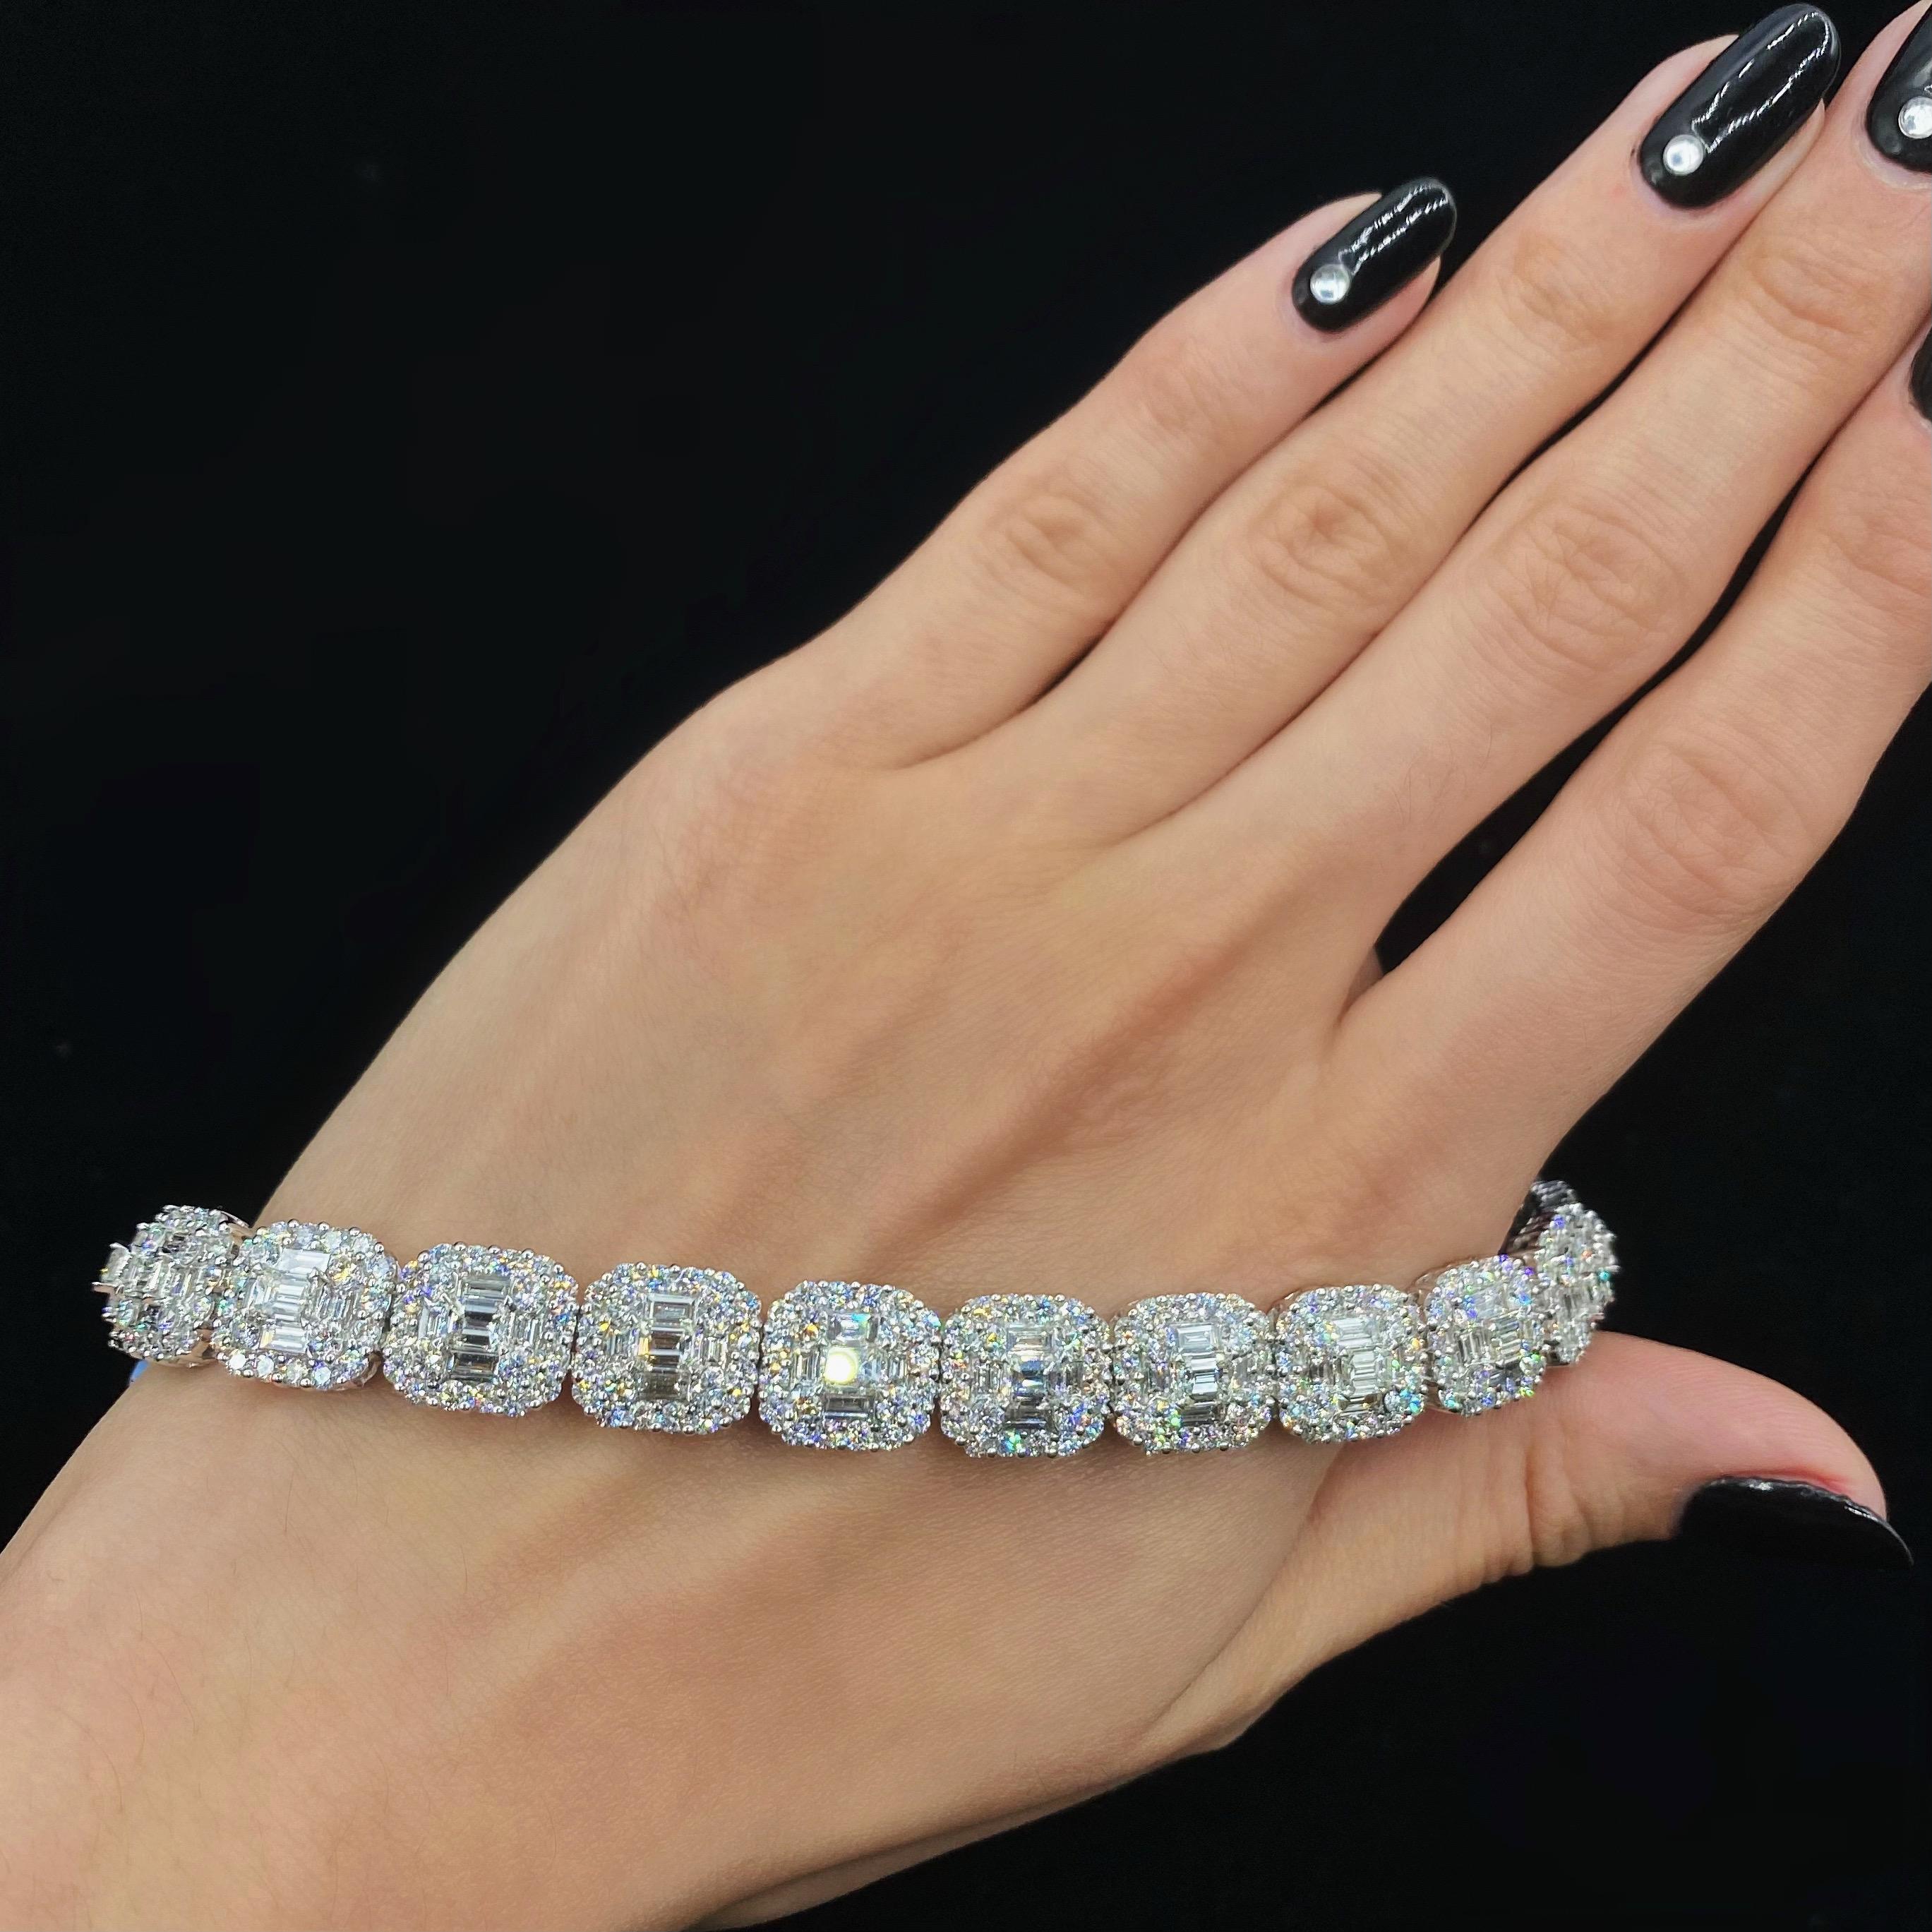 18k White Gold Diamond Bracelet In Excellent Condition For Sale In New York, NY